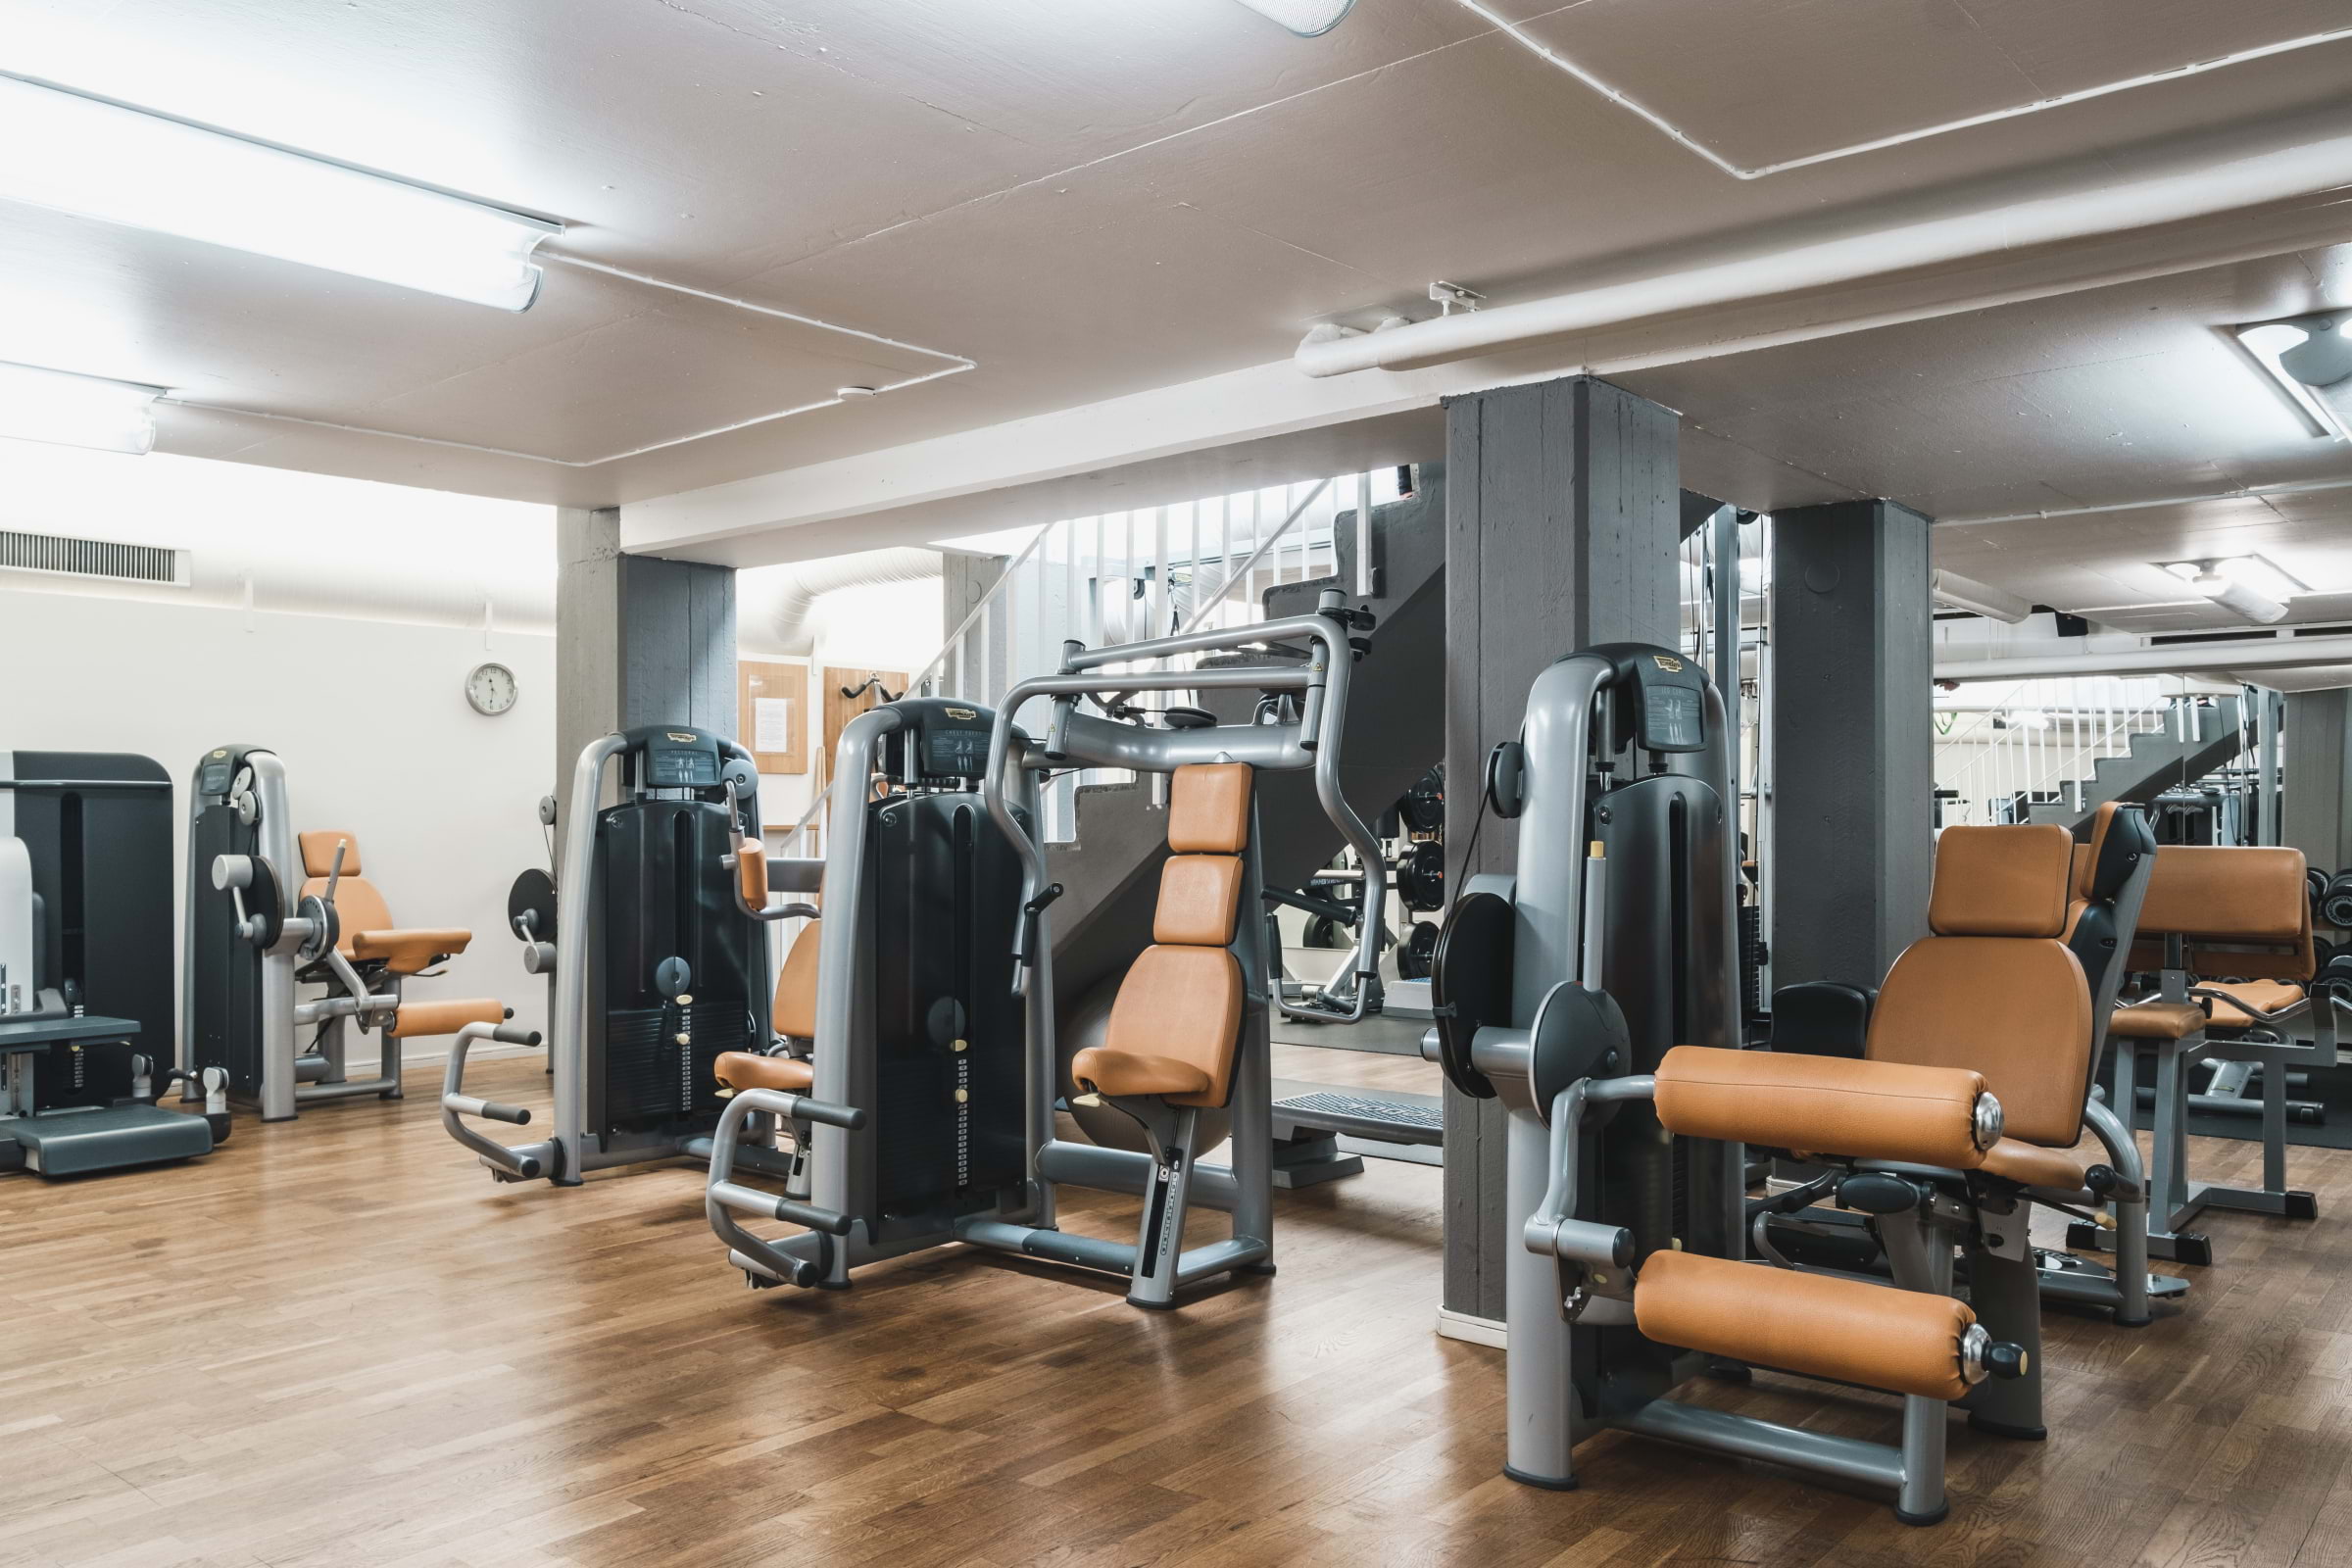 The guide to Stockholm's best gyms